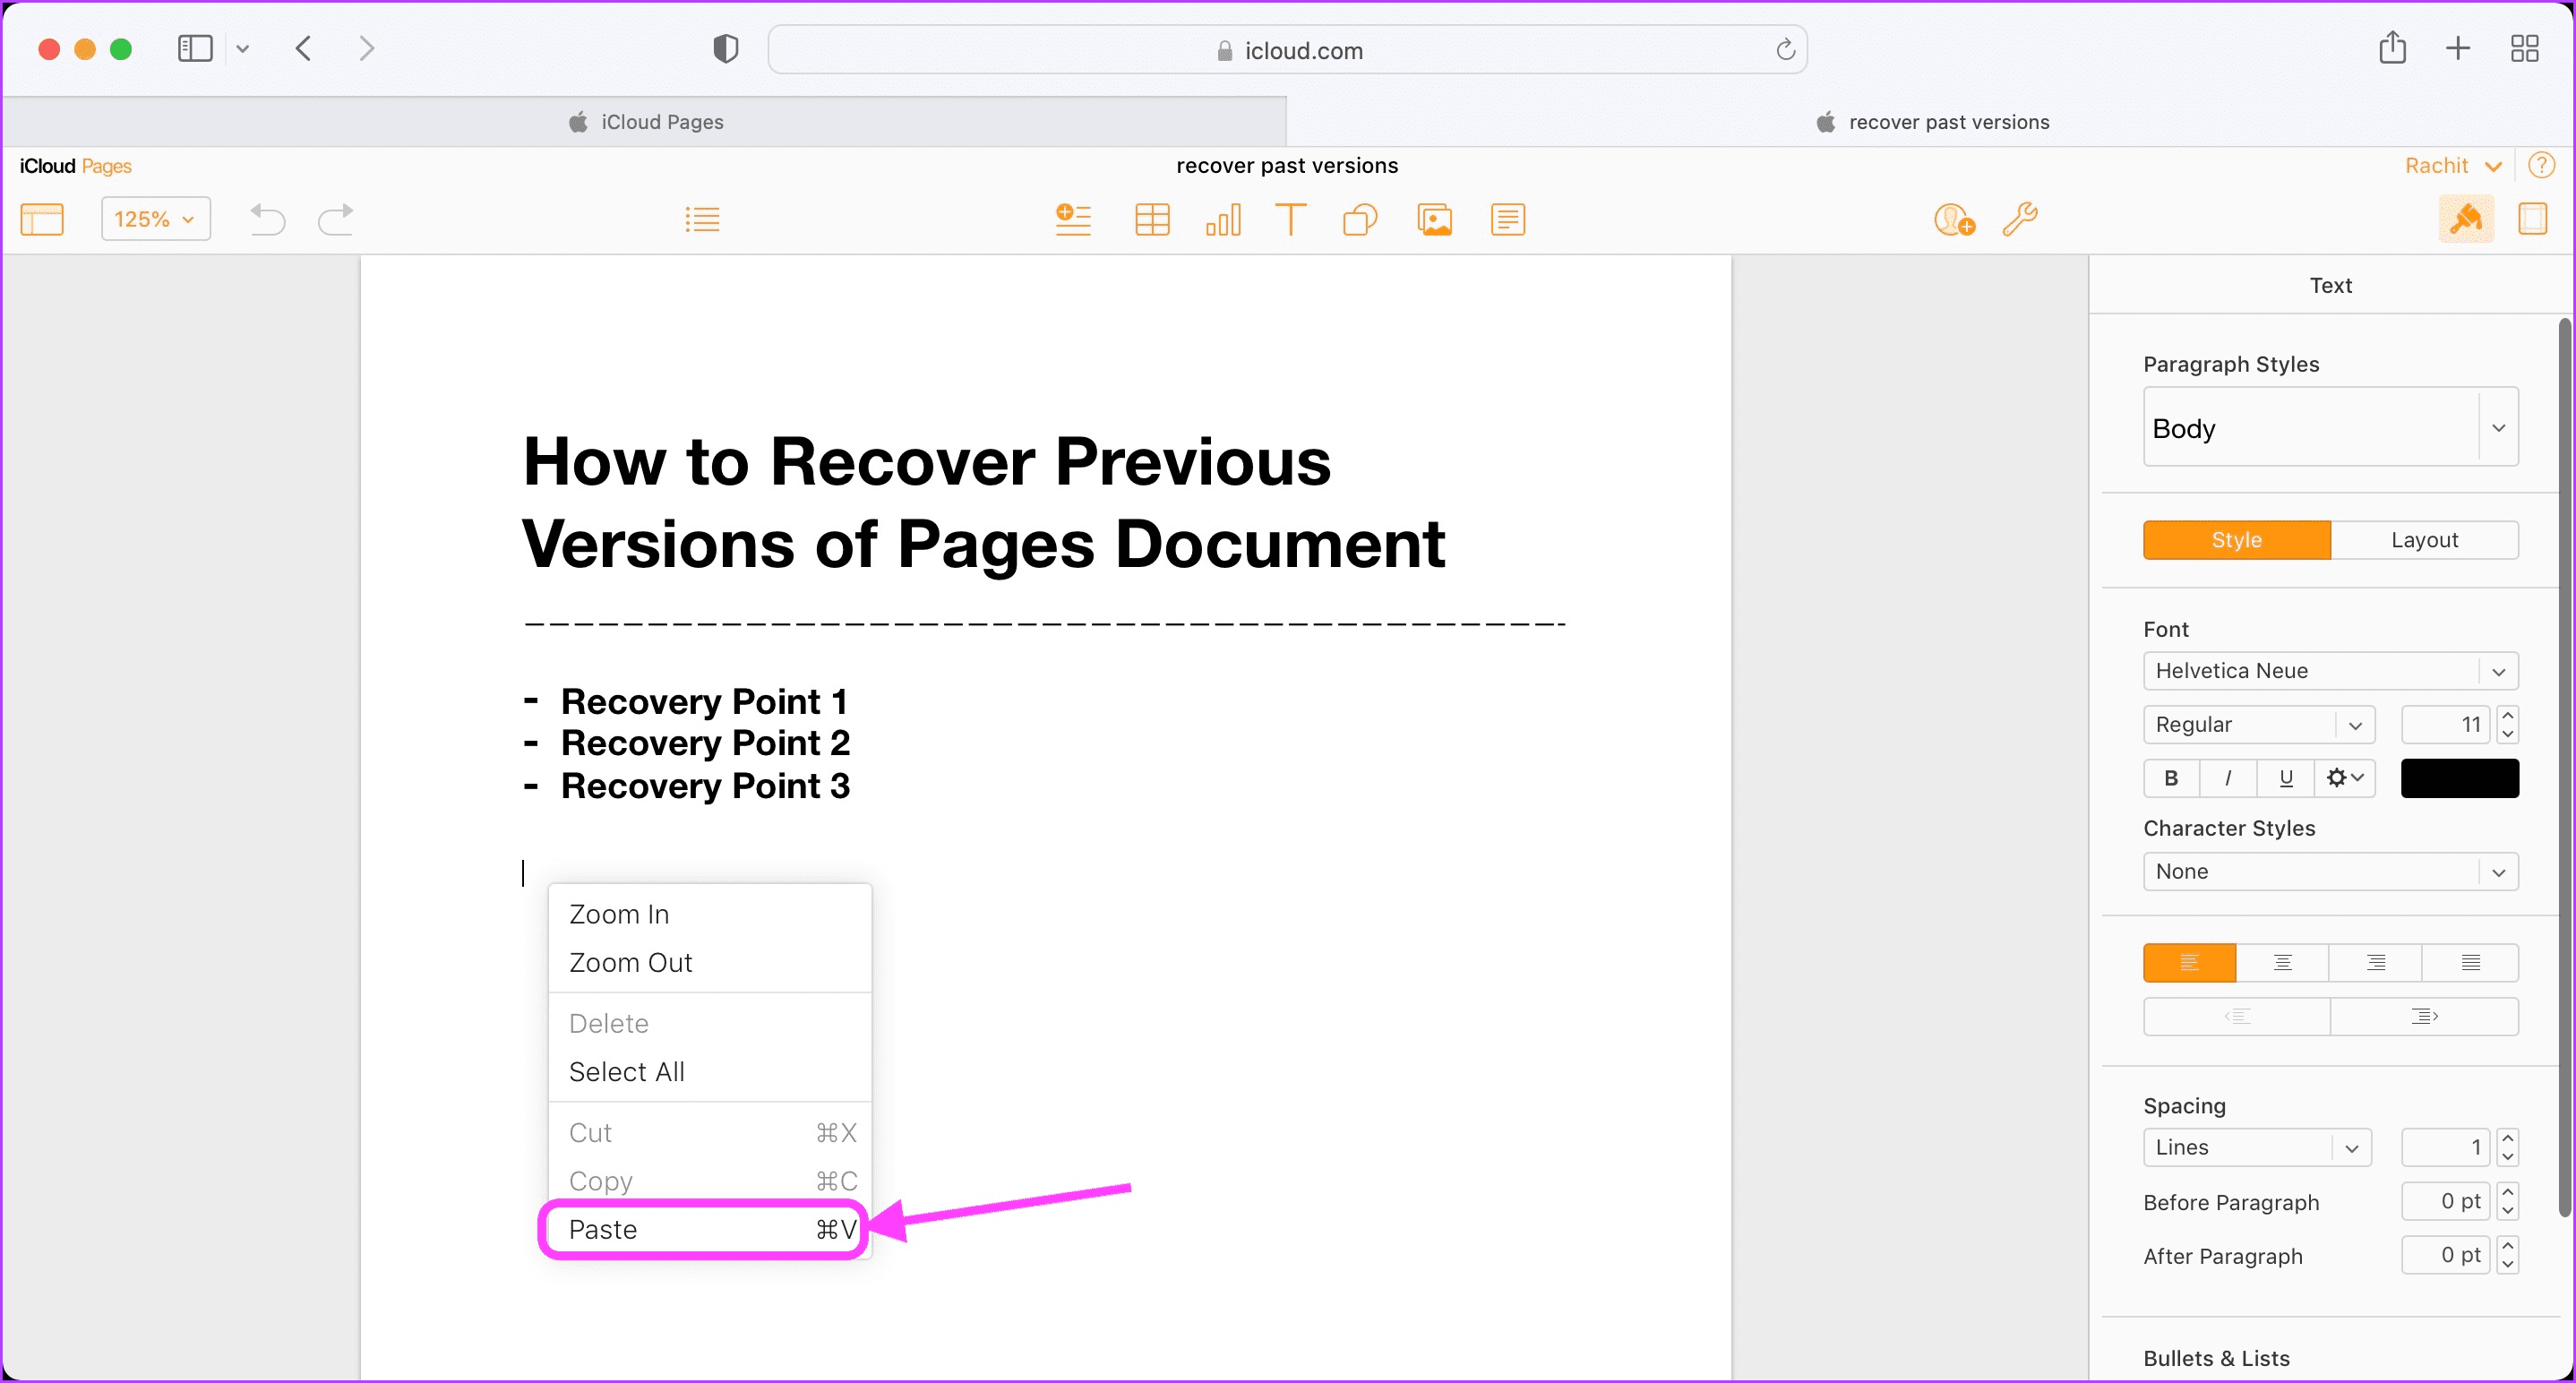 View and Restore Previous Versions of Pages Document in iCloud 11